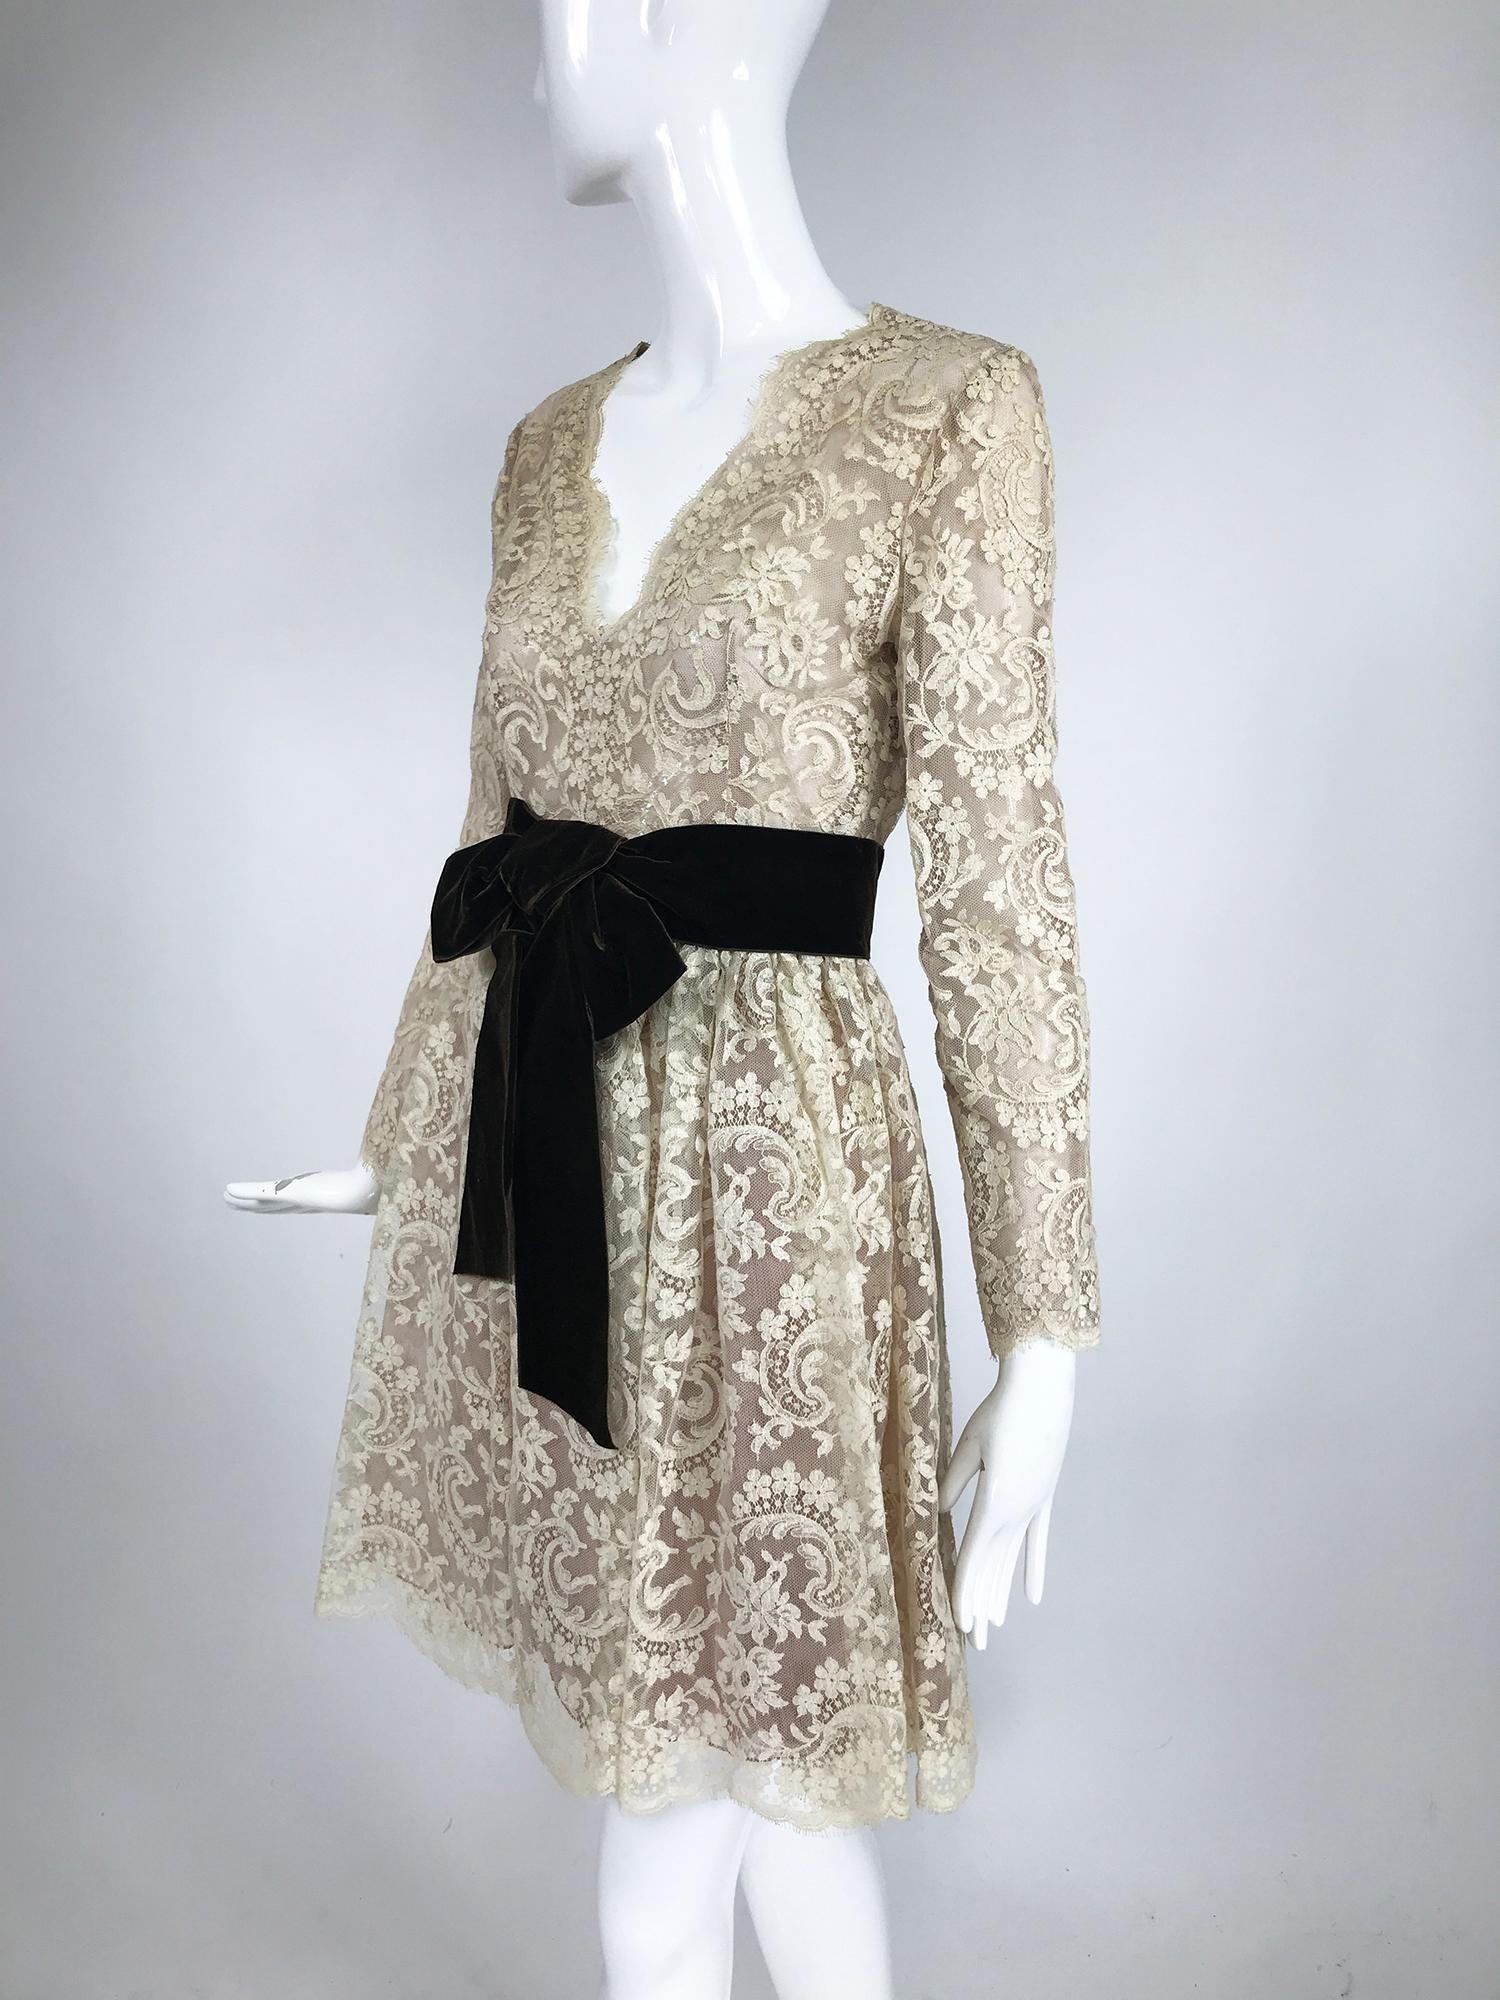 Vintage Rembrandt 1960s Cream lace baby doll dress. This is such a beautiful dress and it would make a great wedding dress! Labeled Ole Borden for Rembrandt, it has great style and is so evocative of the mid 1960s. Off white lace is layered over a